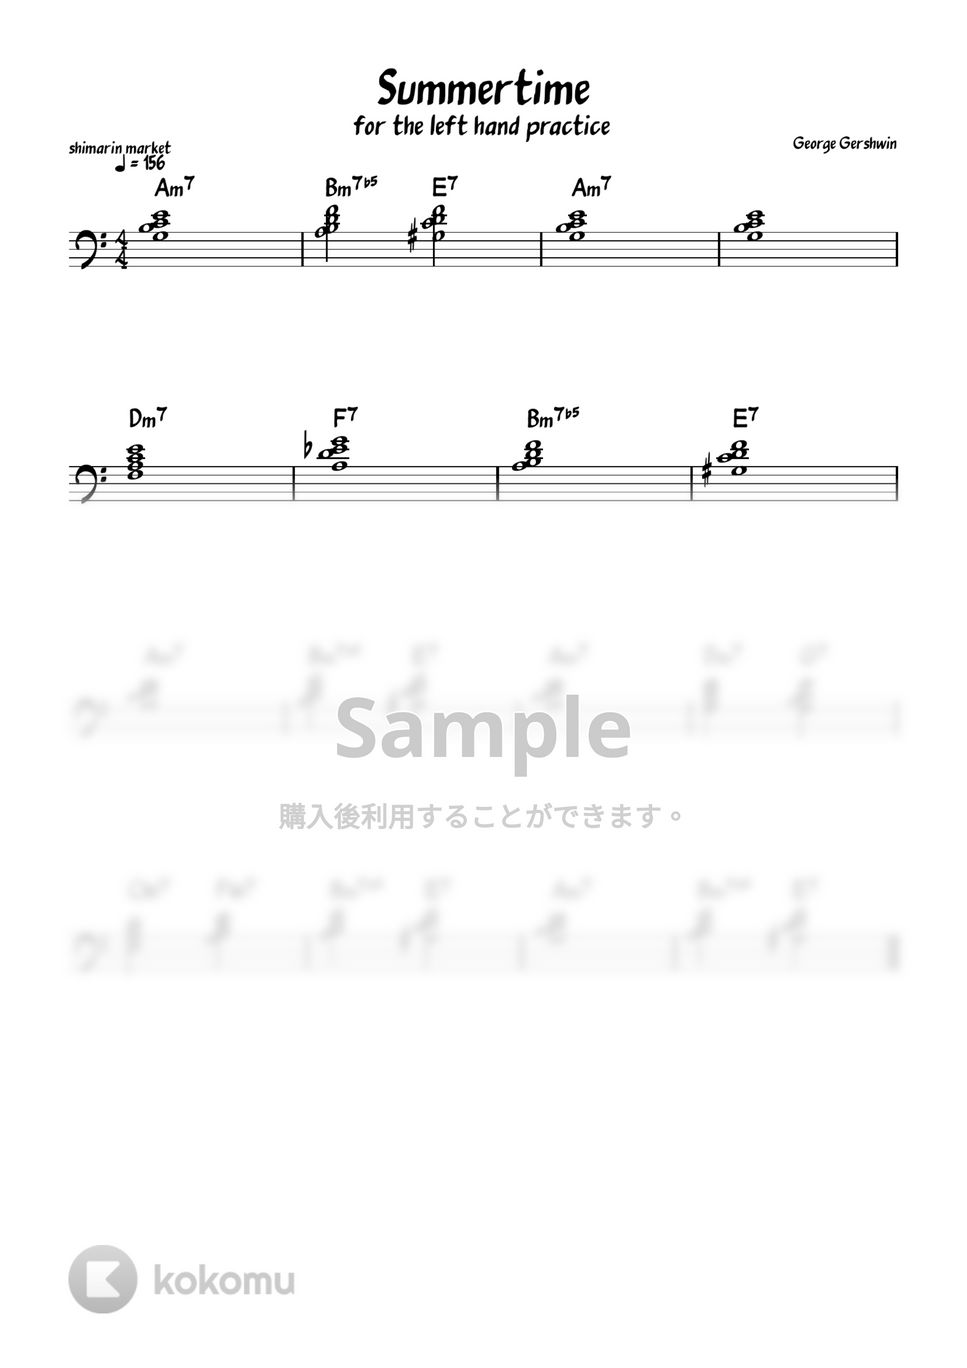 George Gershwin - Summertime (for the left hand practce) by shimarin market